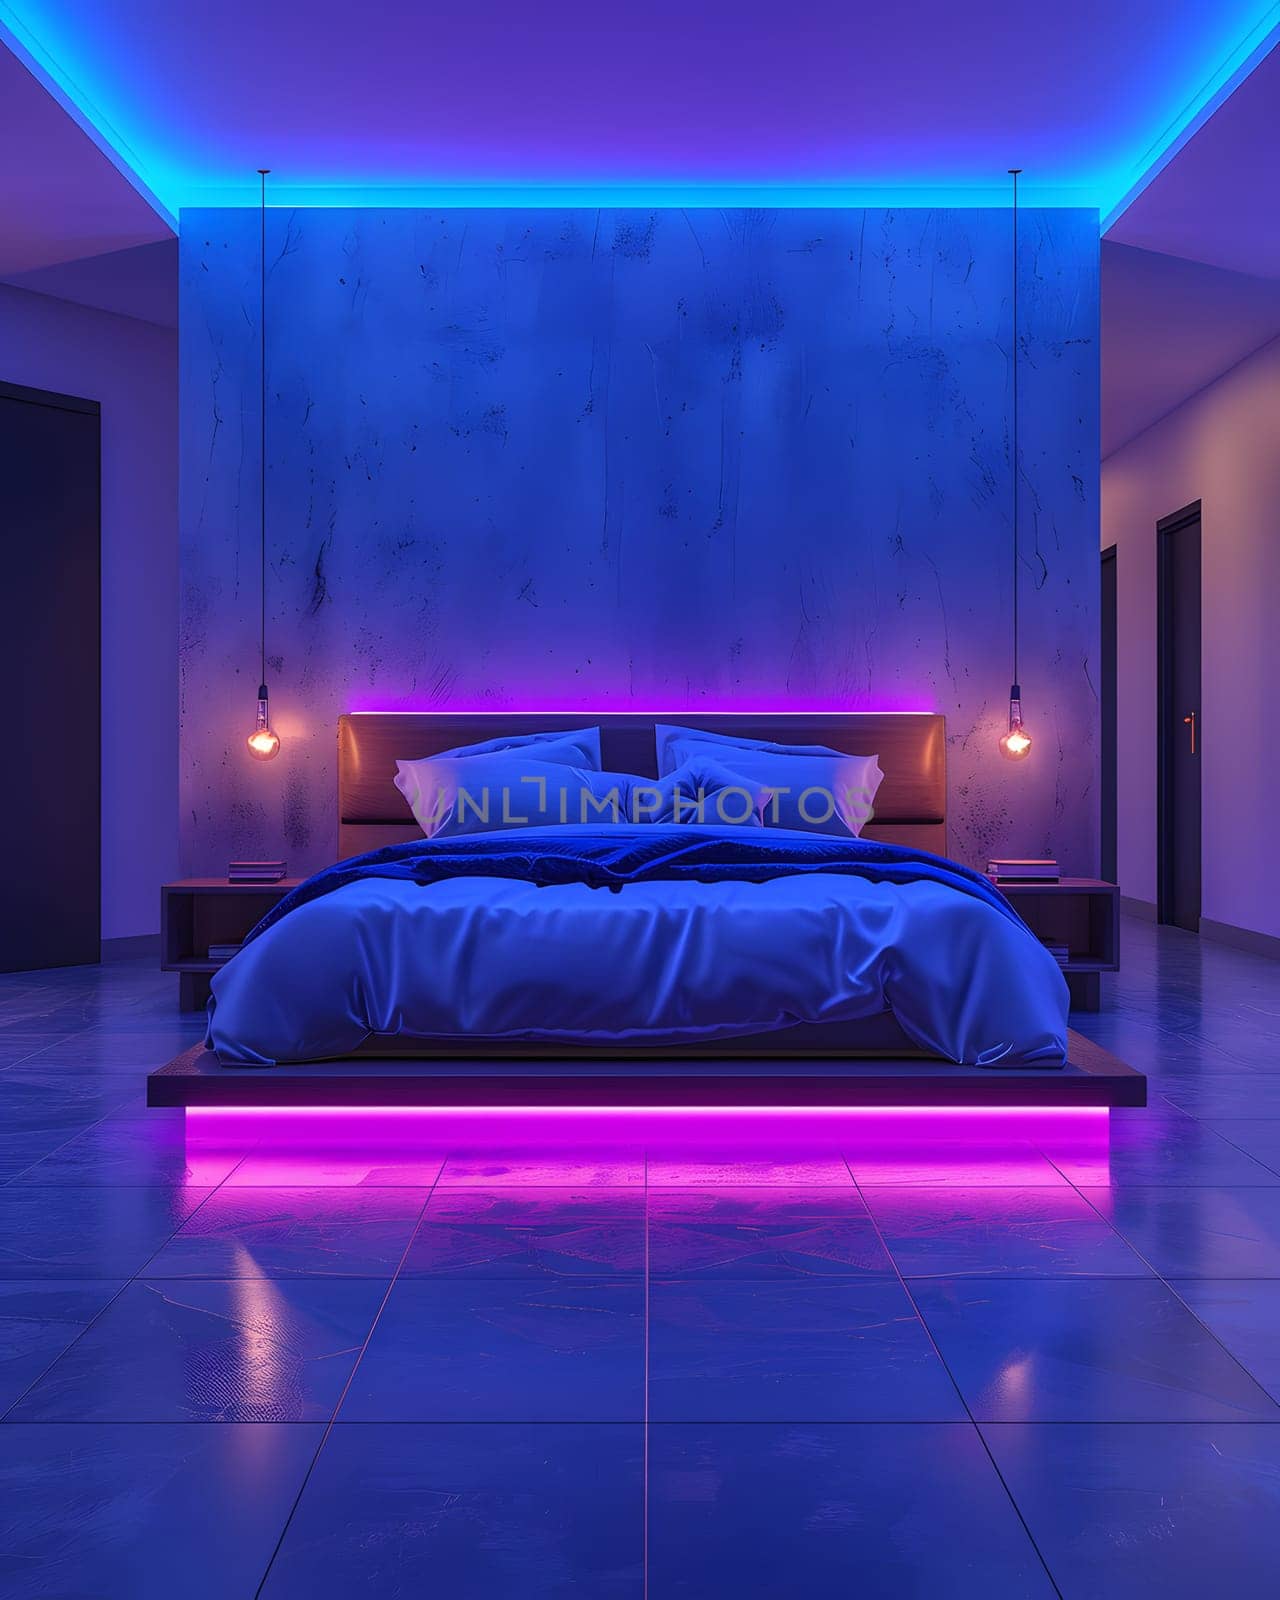 A cozy bedroom featuring a spacious bed, comfortable couch, and neon lights on the ceiling casting a purple and blue glow reminiscent of a starry sky. Perfect for relaxation and entertainment